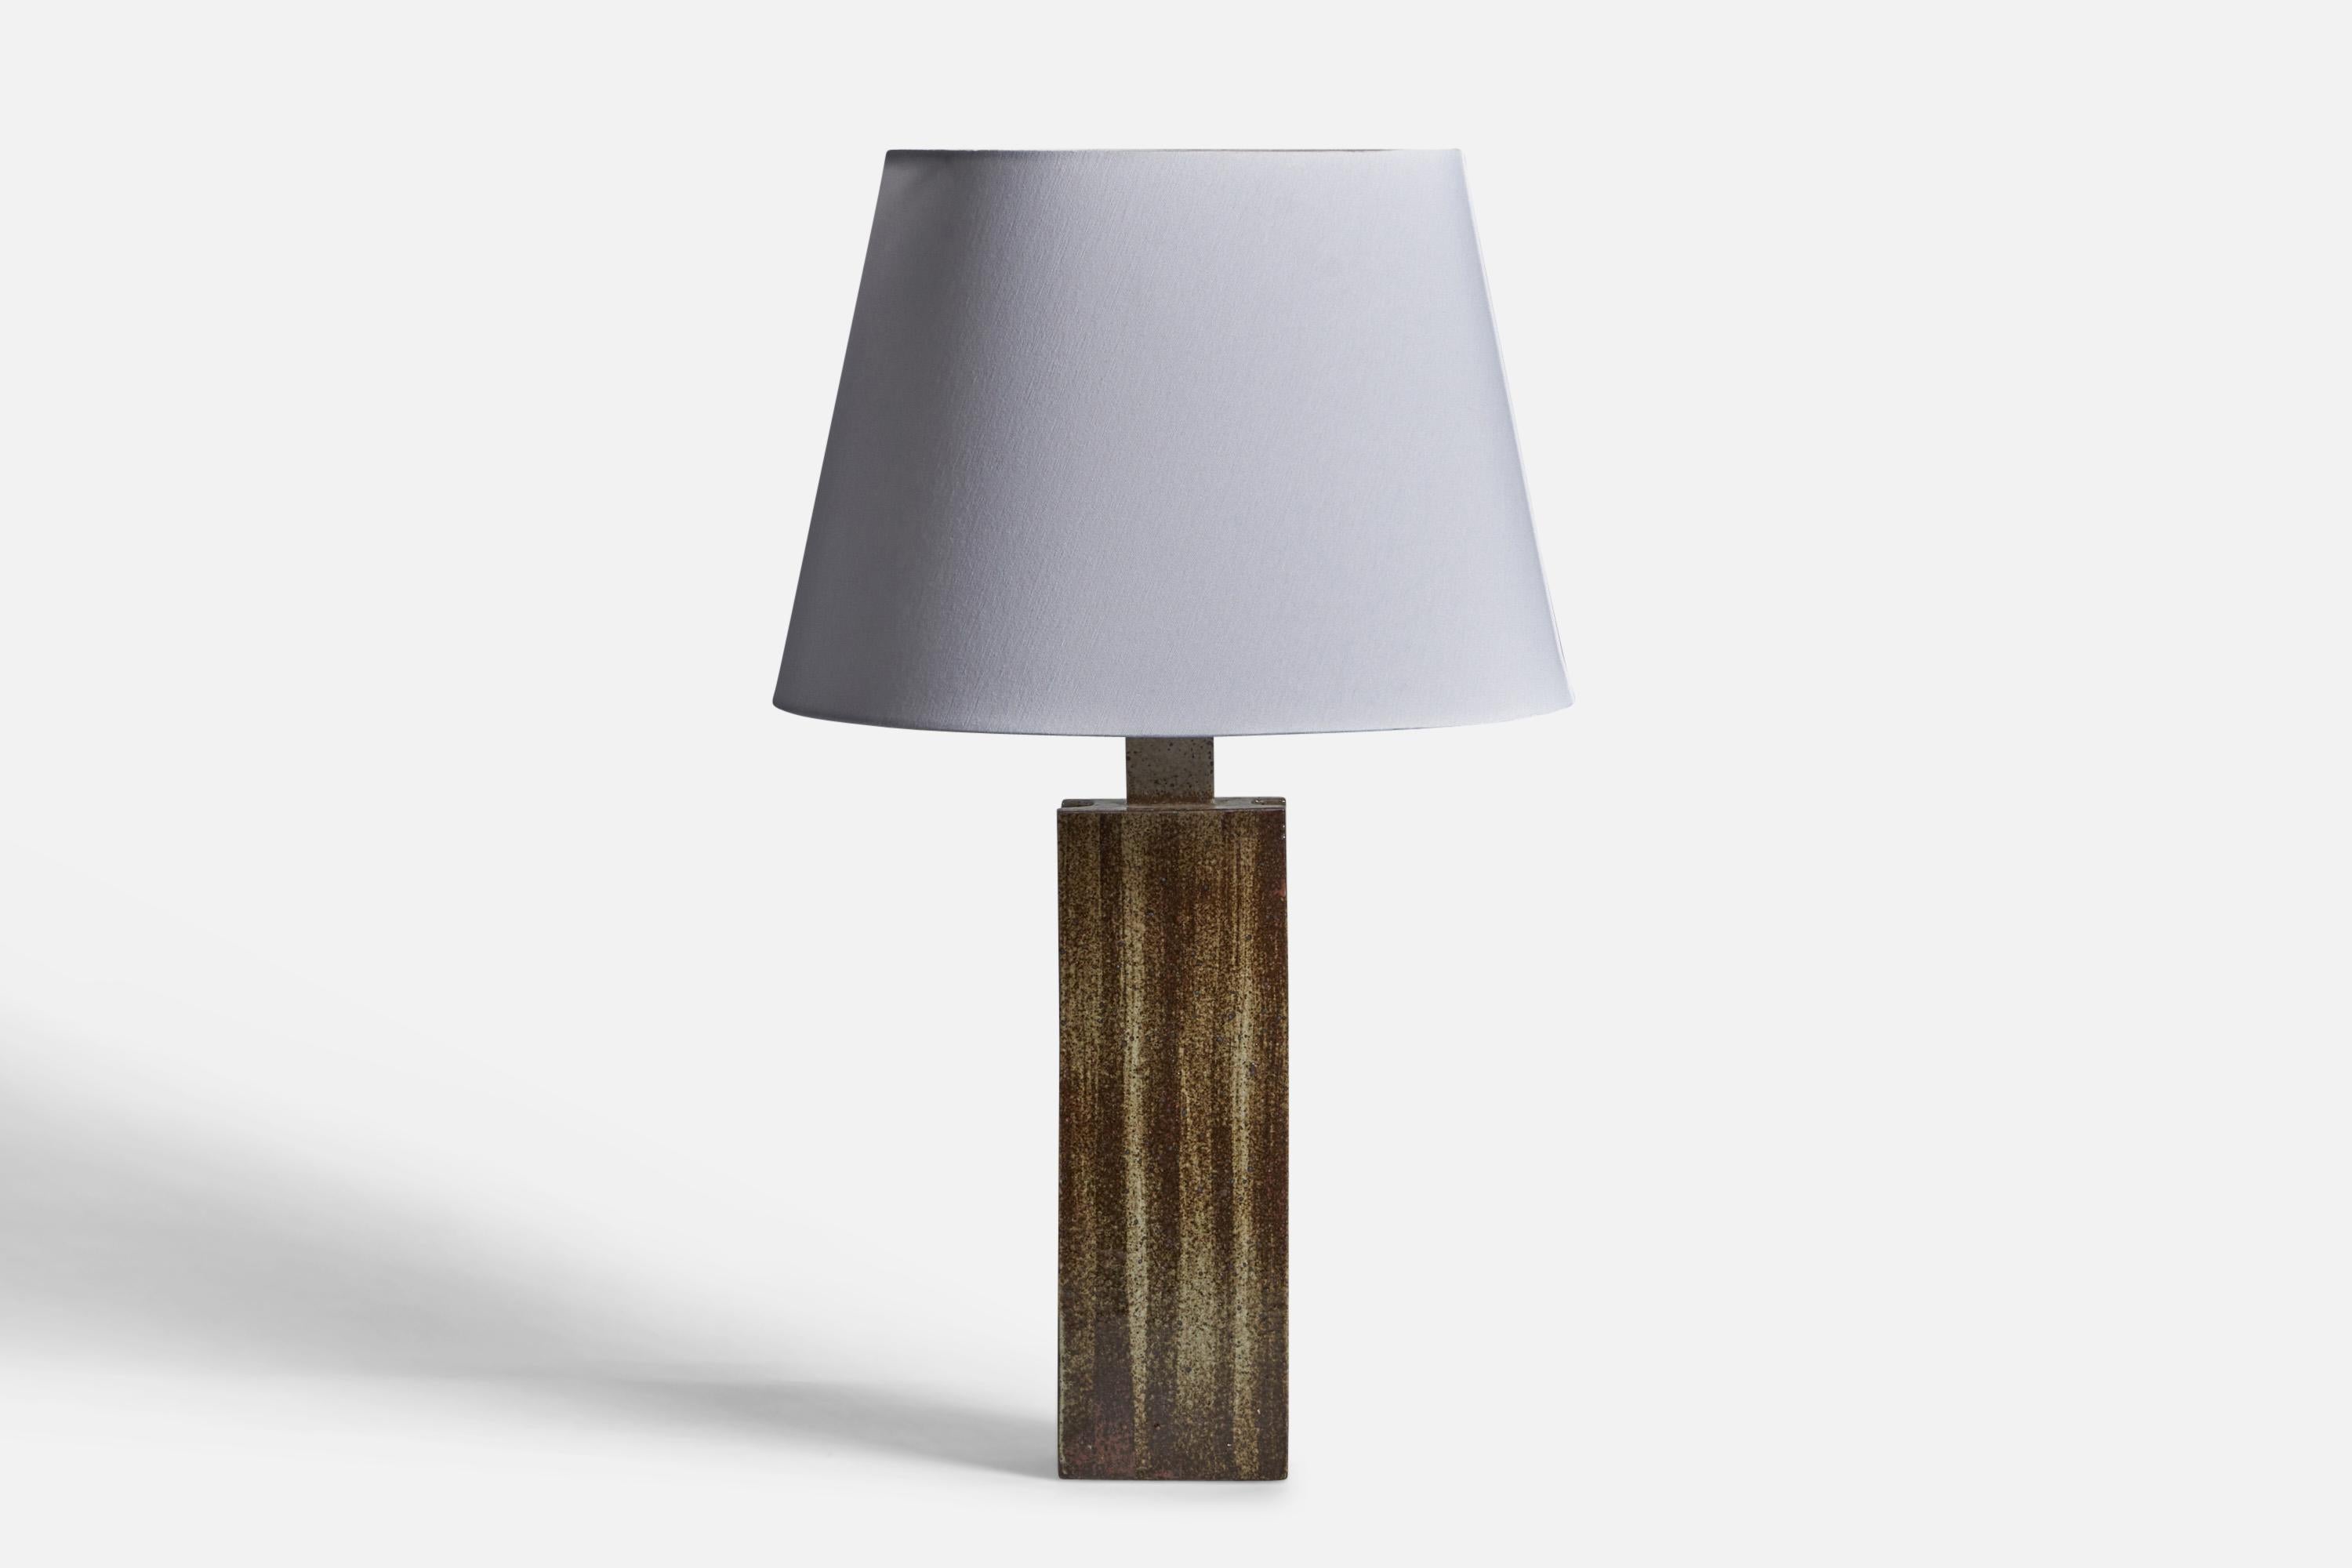 A brown and grey-glazed stoneware table lamp, designed by Per & Annelise Linneman-Schmidt, and produced by Palshus, Sengeløse, Denmark, c. 1950s.

Dimensions of Lamp (inches): 17.5